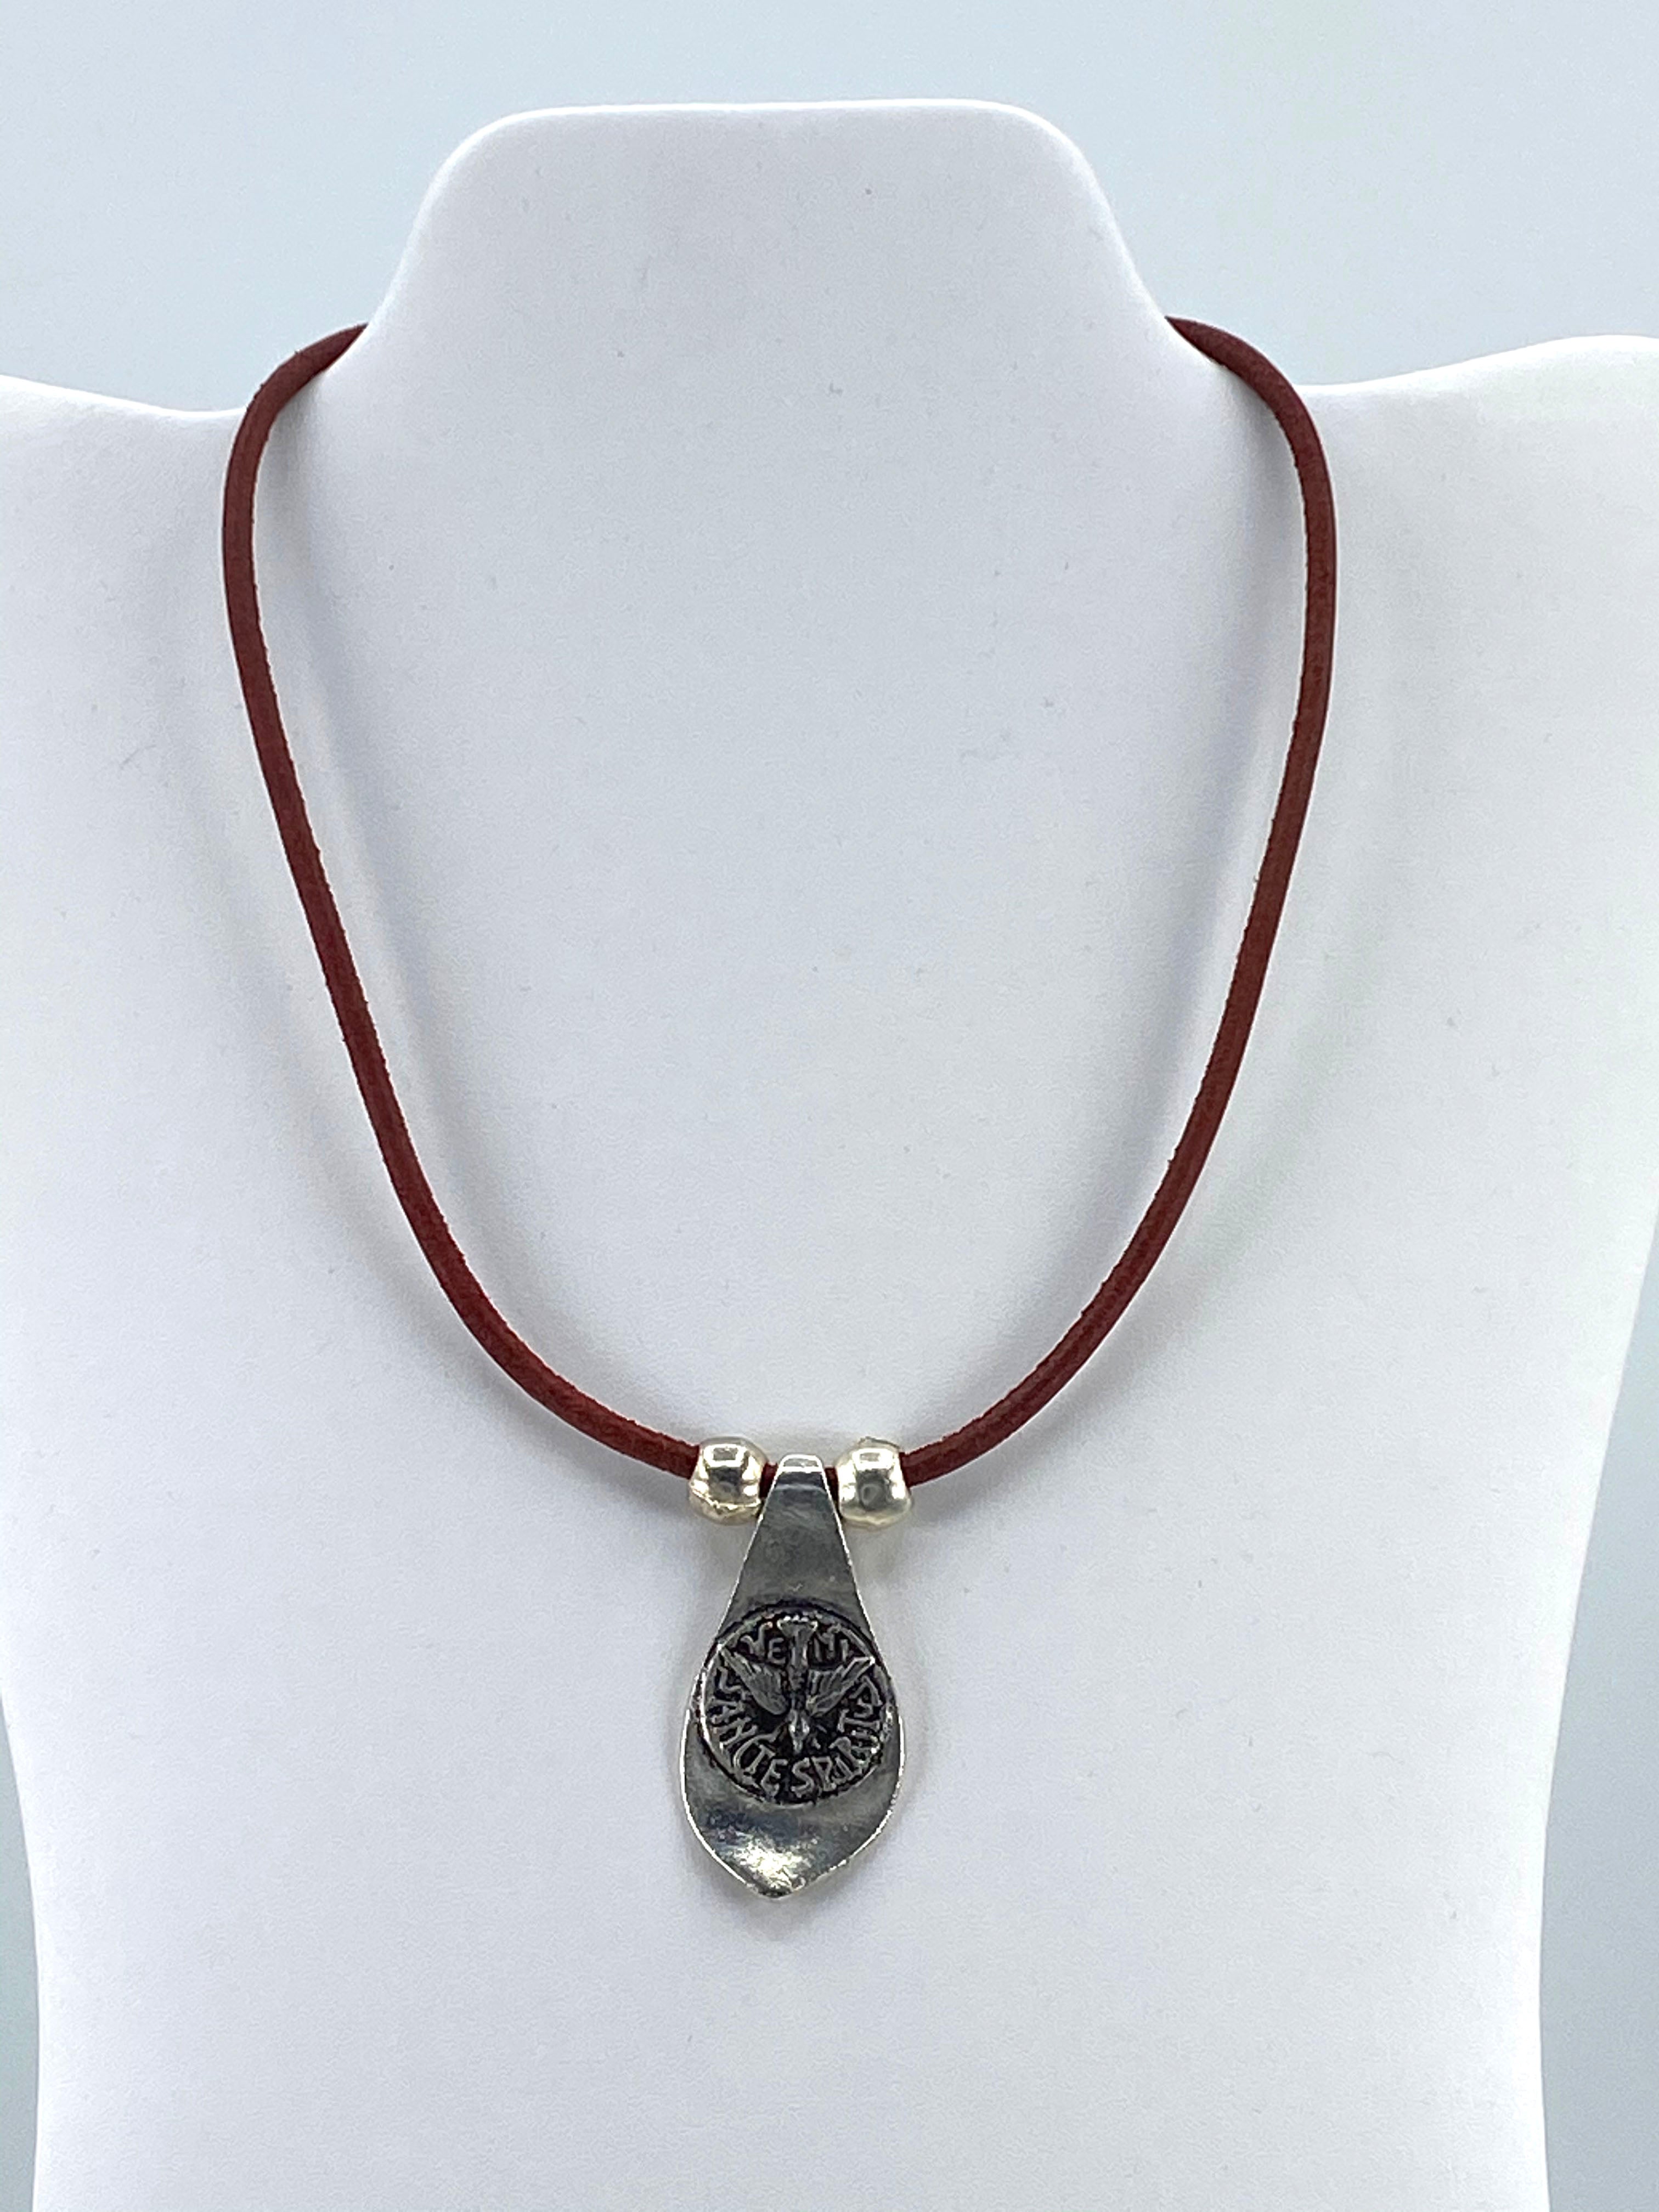 Vintage Necklace of The Holy Spirit Handmade Jewelry with Genuine Leather Strap by Graciela's Collection